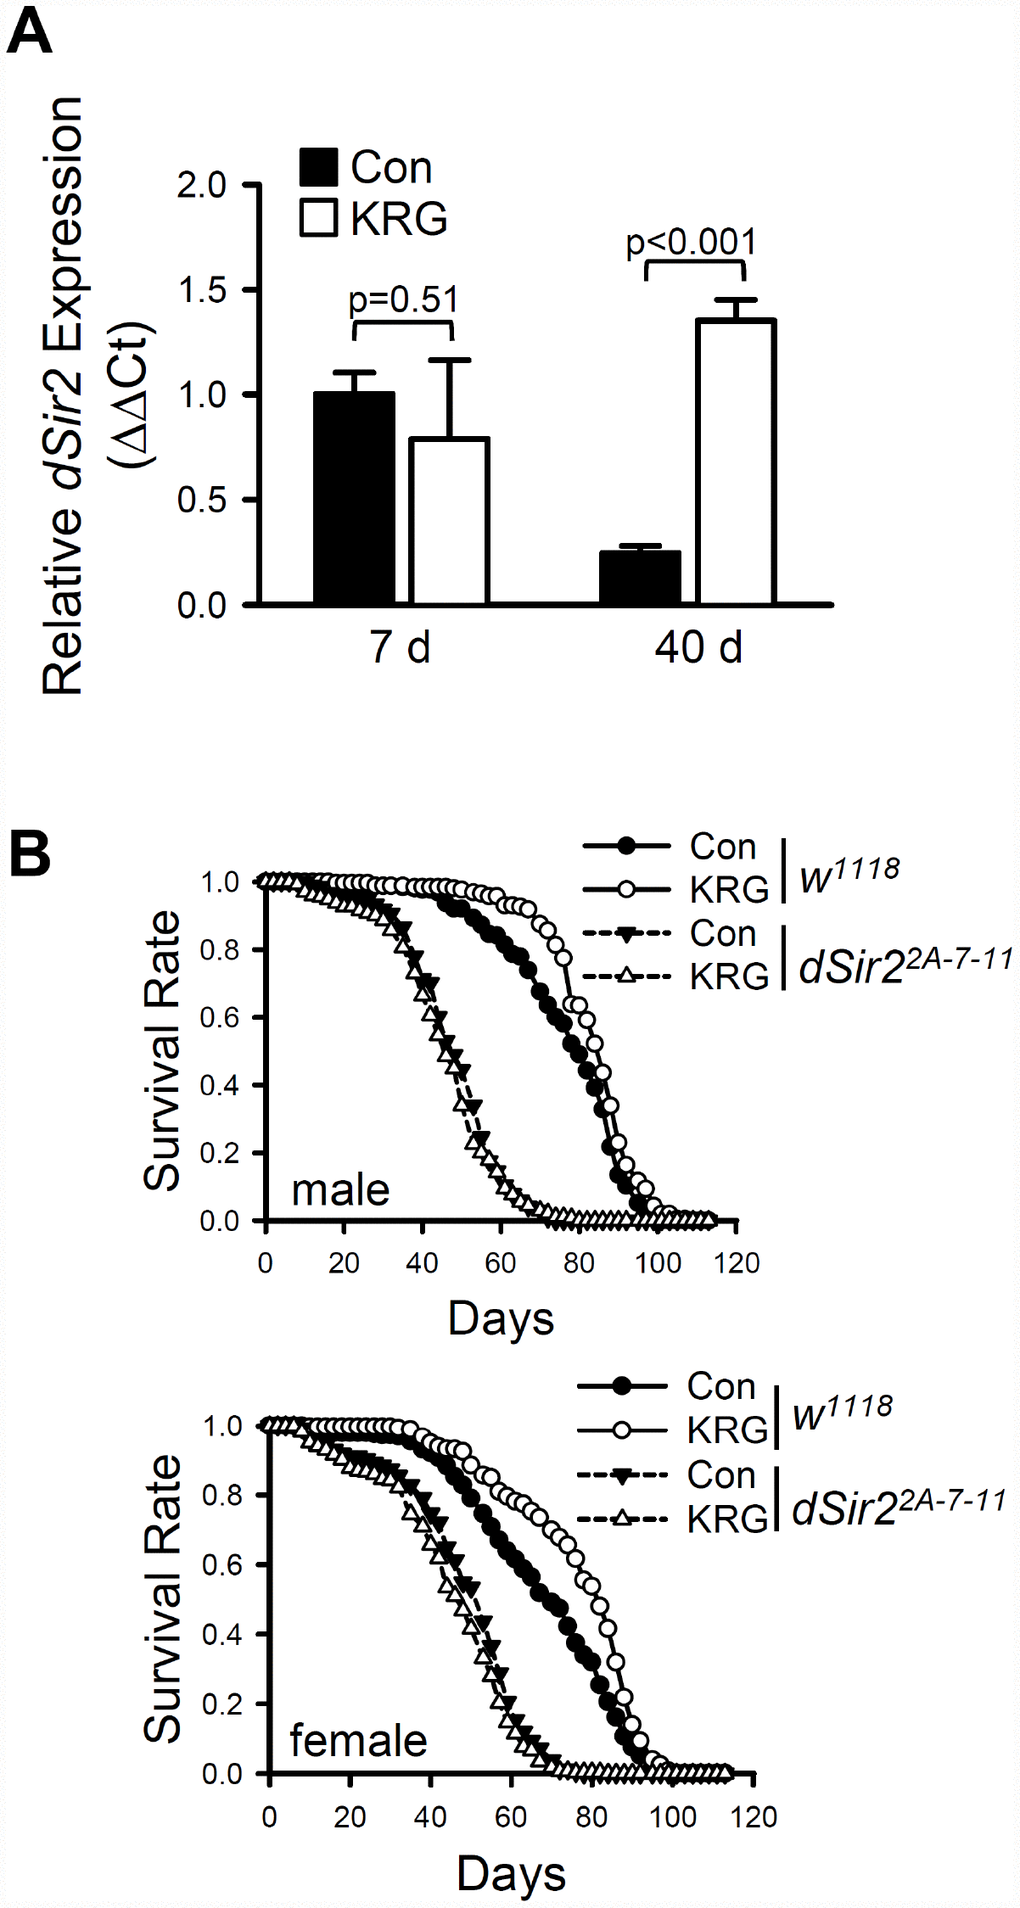 Lifespan extension by KRG is mediated through the Sir2 pathway. (A) The mRNA level of dSir2 was analyzed in the whole body of male fruit flies fed a KRG-containing diet or a control diet for 7 or 40 days. (B) Survival of dSir2 null mutant flies (dSir22A-7-11, dashed lines) and control flies (w1118, solid lines) fed a KRG-containing diet (lines with open dots) or a control diet (lines with closed dots).